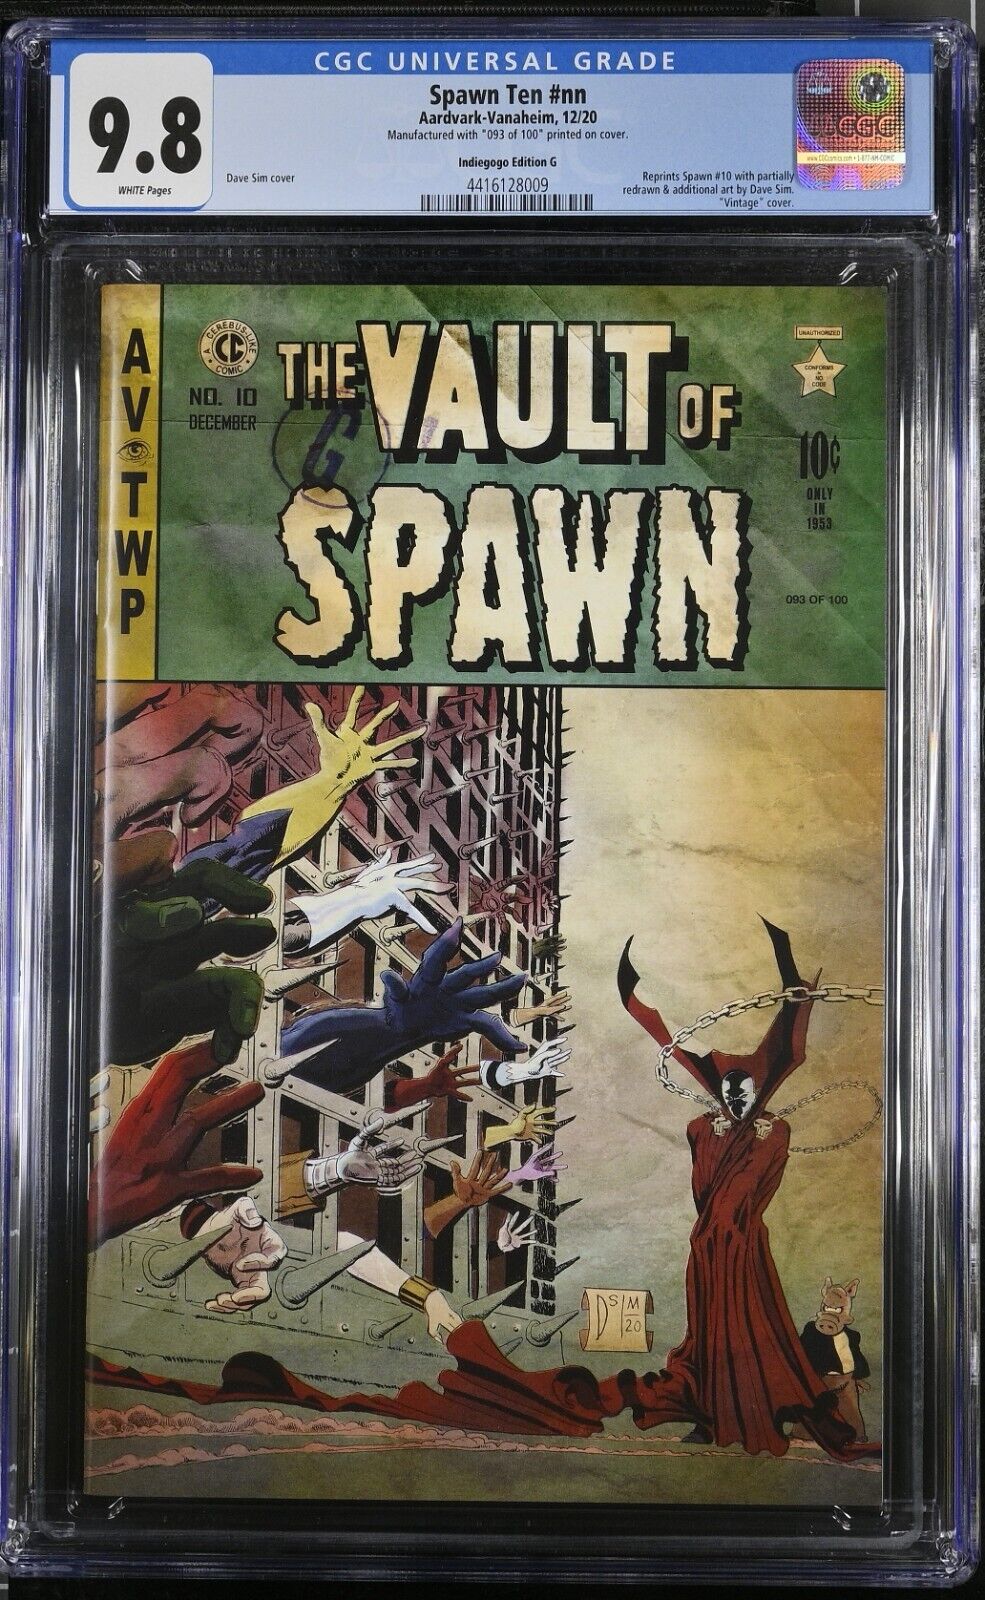 SPAWN TEN REMASTERED INDIEGOGO EDITION G #93 OF 100 CGC 9.8 EXTREMELY RARE HTF